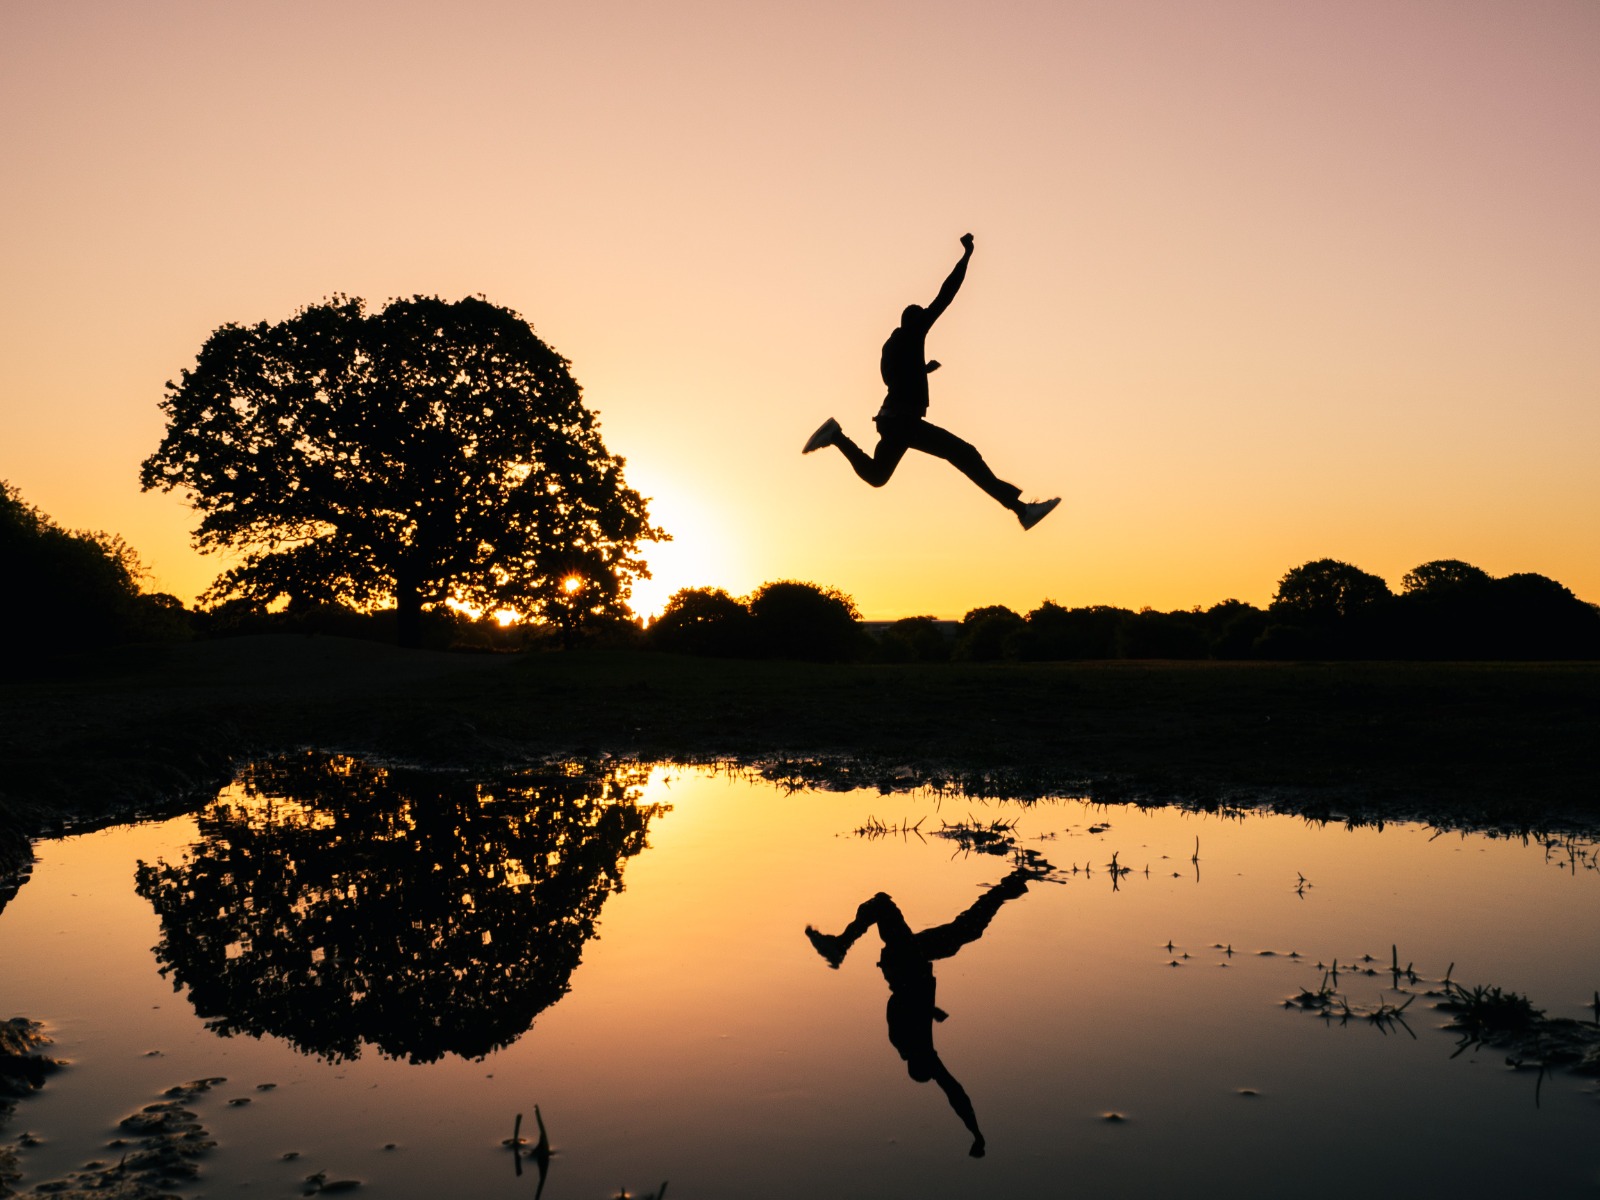 Silhouette of person jumping across stream